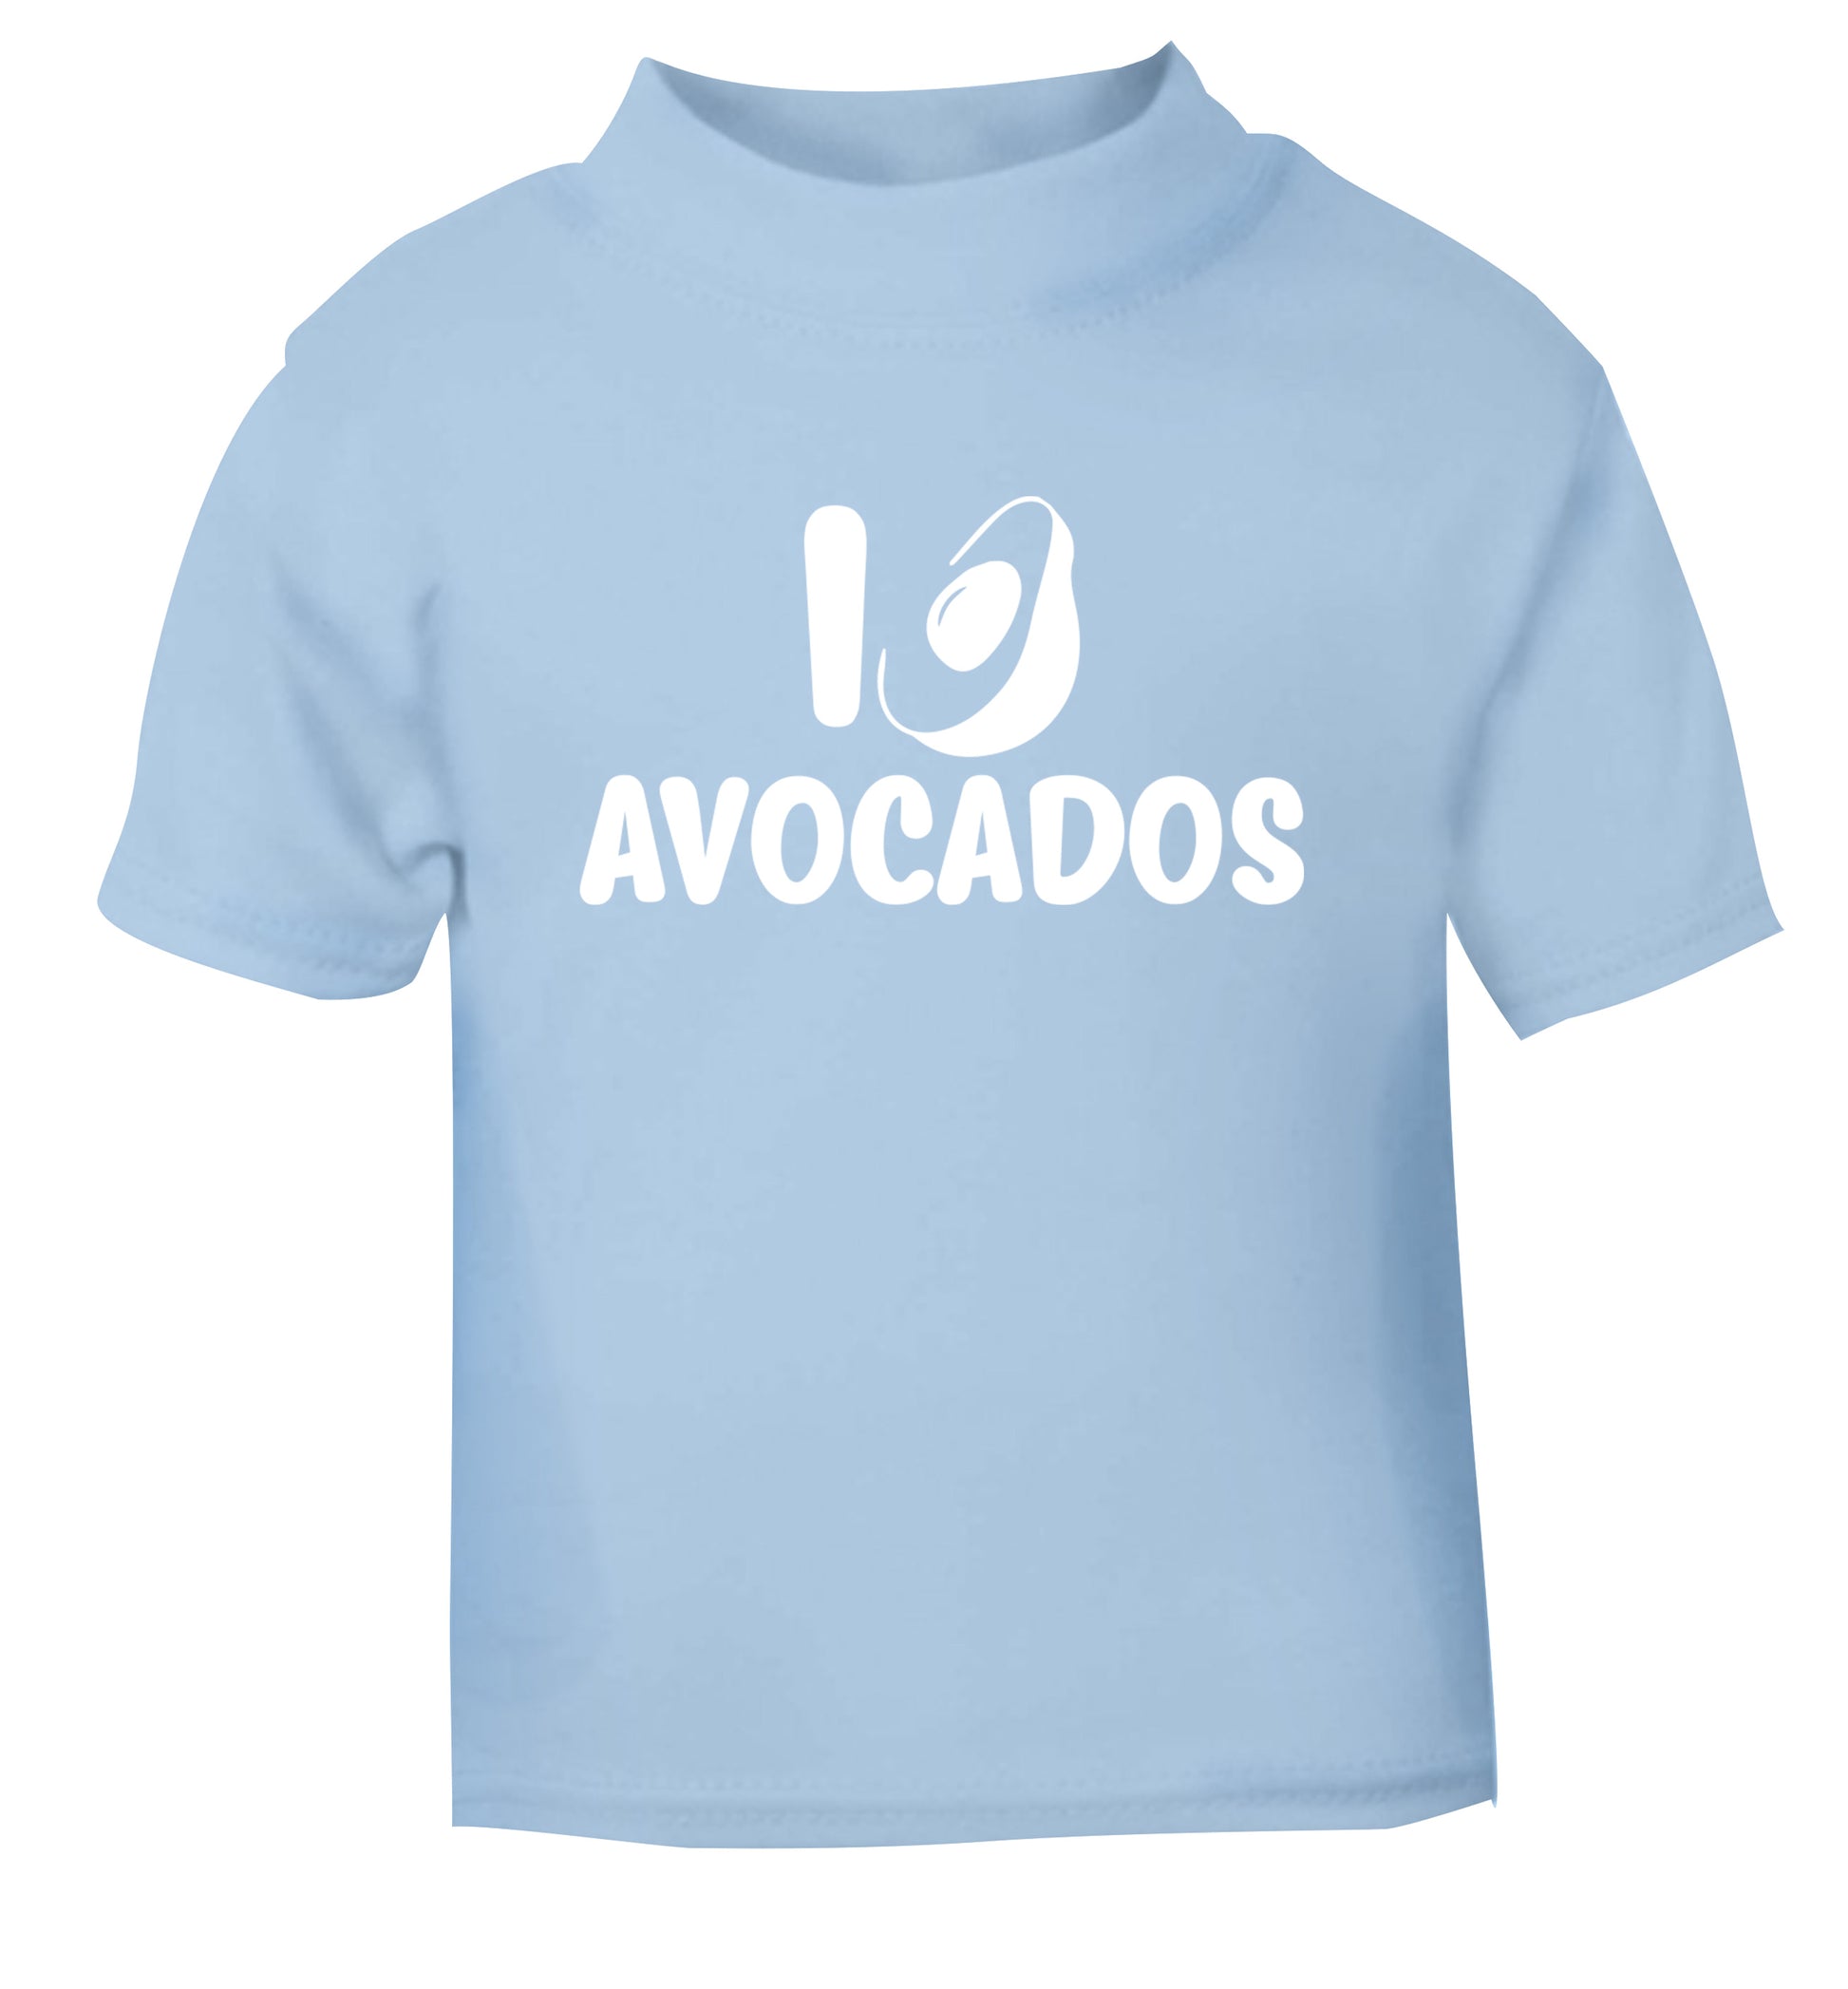 I love avocados light blue Baby Toddler Tshirt 2 Years